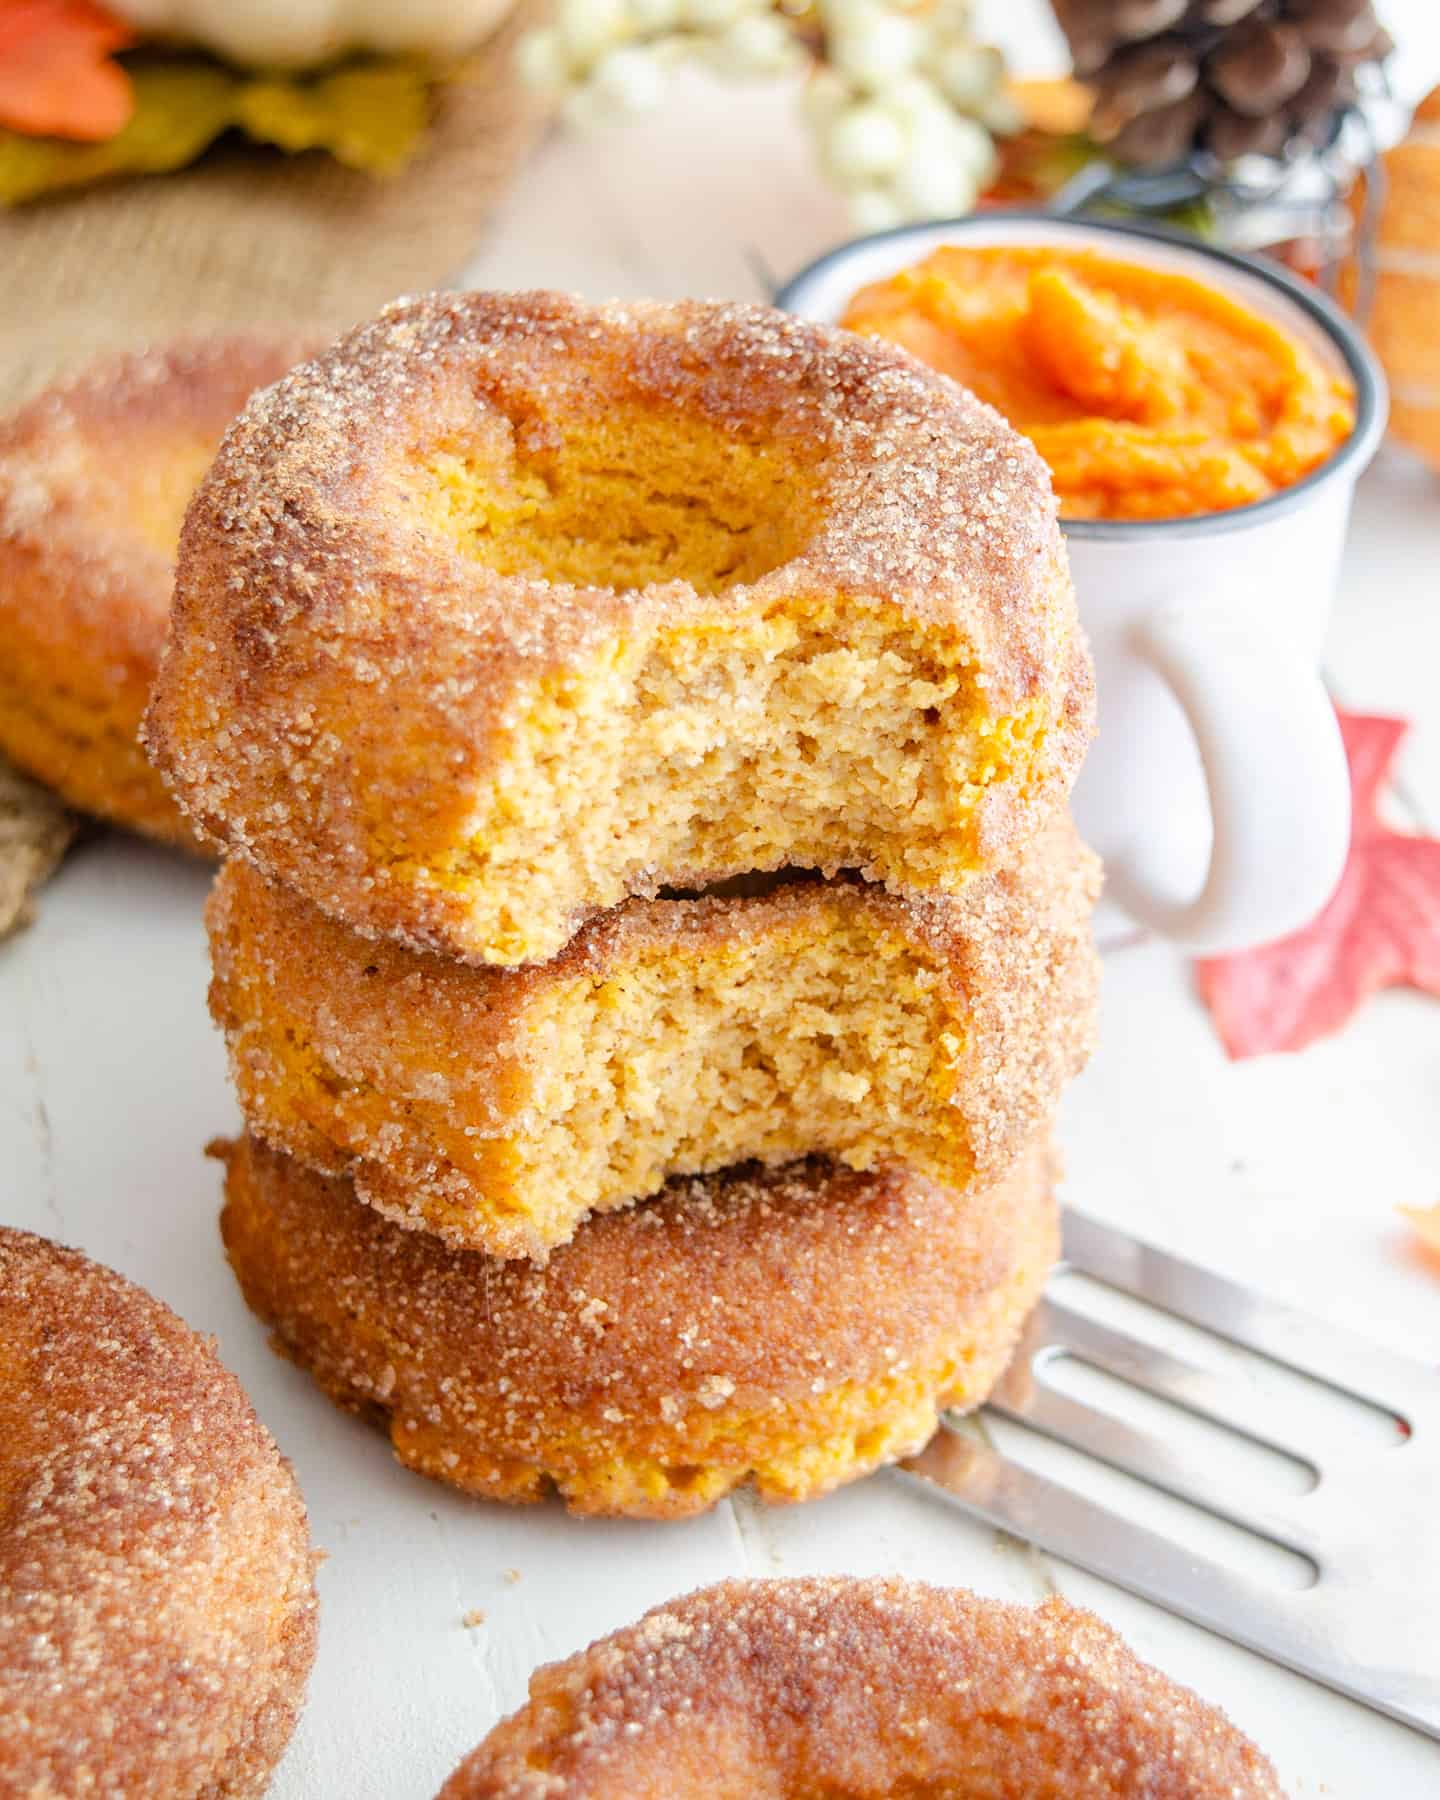 A stack of baked keto pumpkin pie donuts with a bite out of them showing the cakey interior.